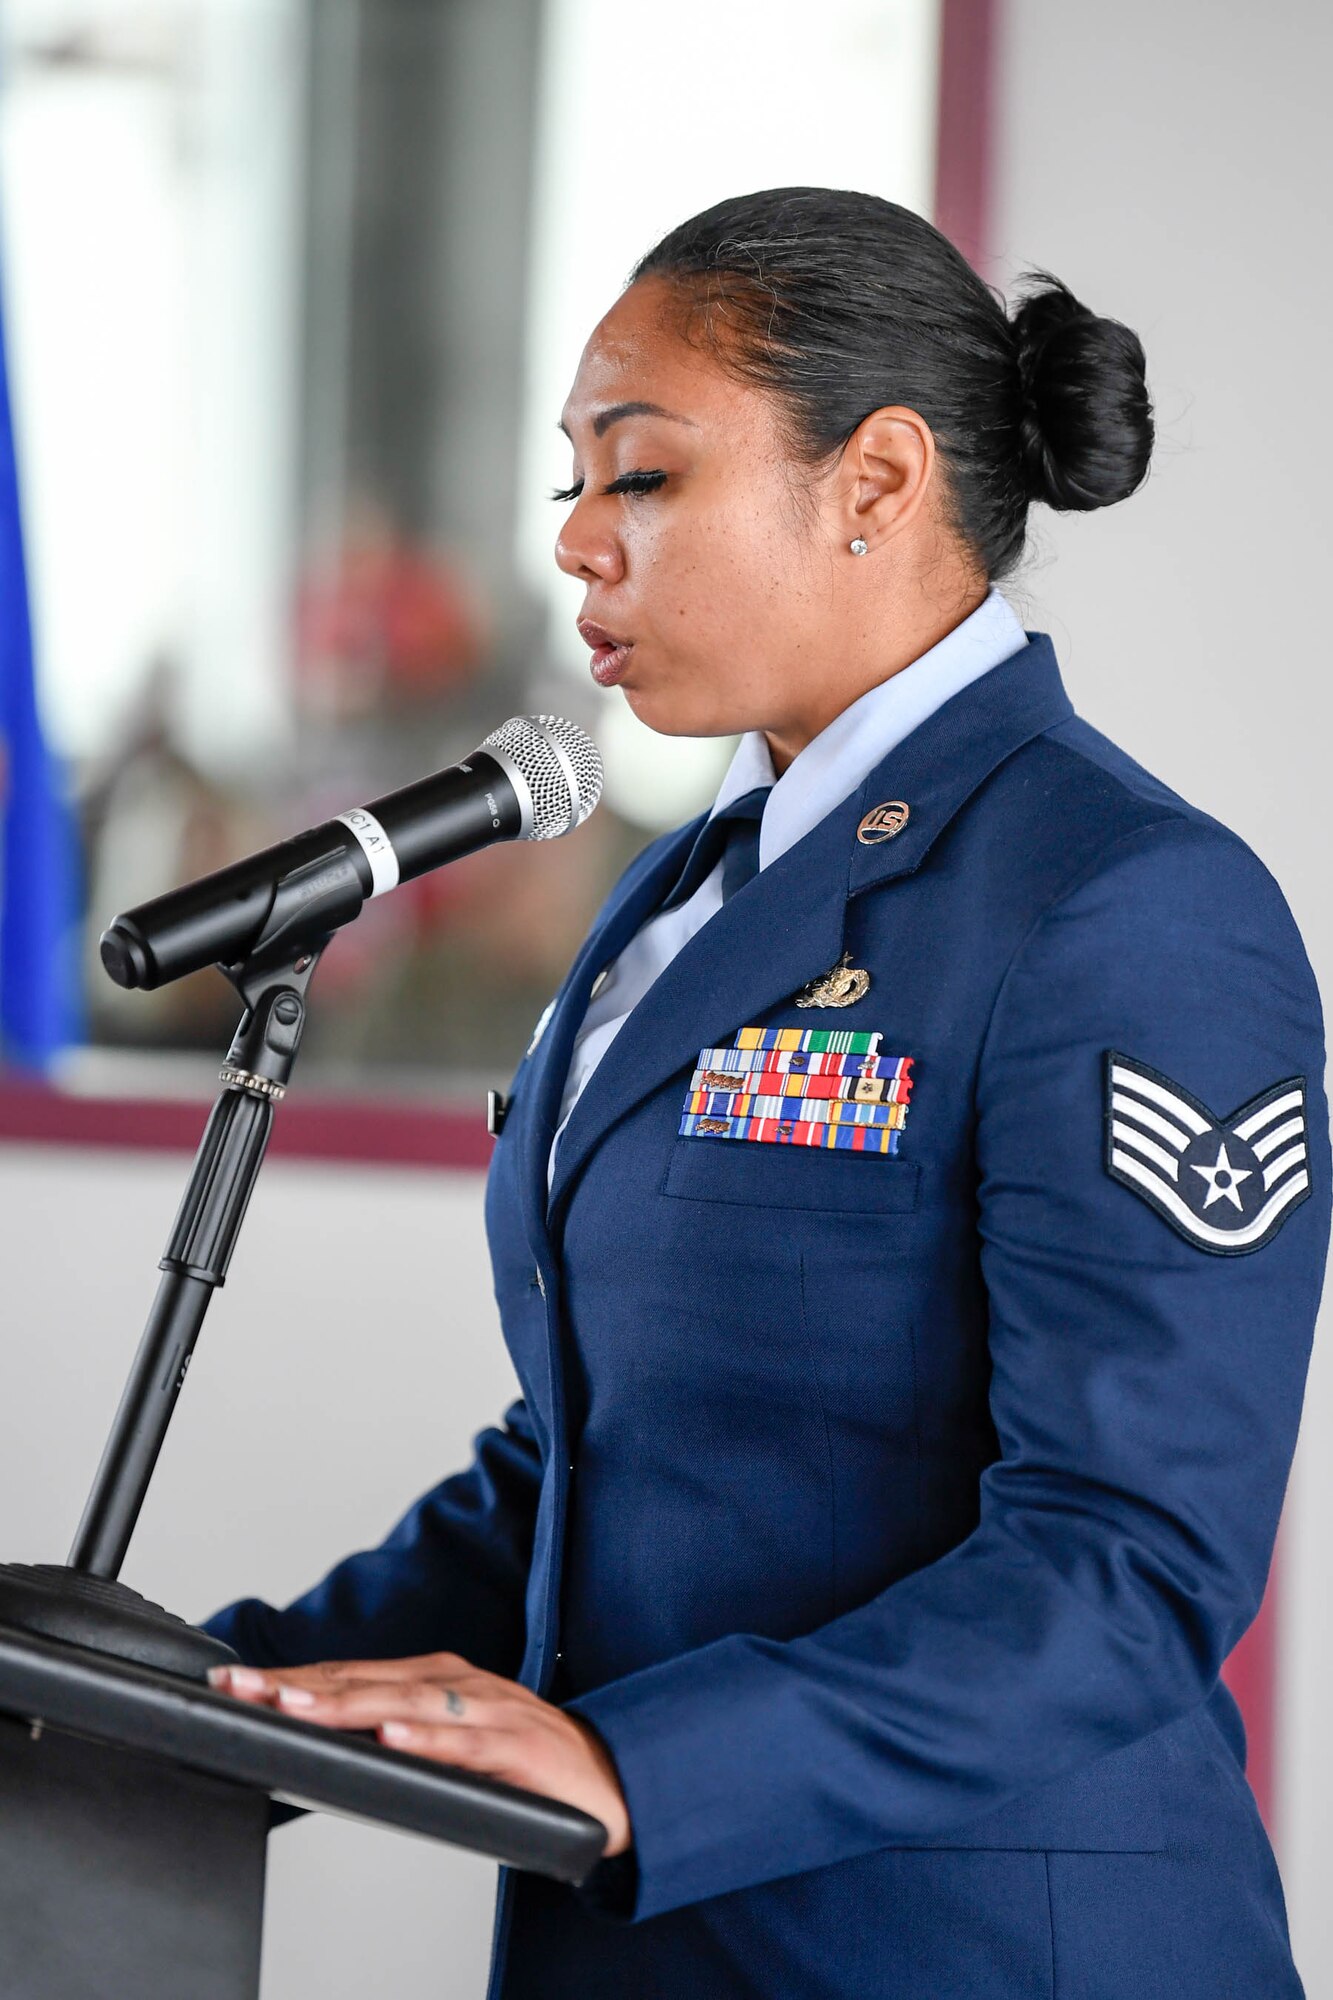 Staff Sgt. Maureen Torres, 436th Security Forces Squadron combat arms instructor, reads the Security Forces Prayer during the 19th Anniversary 9/11 memorial event Sept. 11, 2020, at Dover Air Force Base, Delaware. Members of Team Dover volunteer to participate in the annual memorial event to remember and honor the civilian casualties and the fallen firefighters, police officers and first responders. (U.S. Air Force photo by Mauricio Campino)